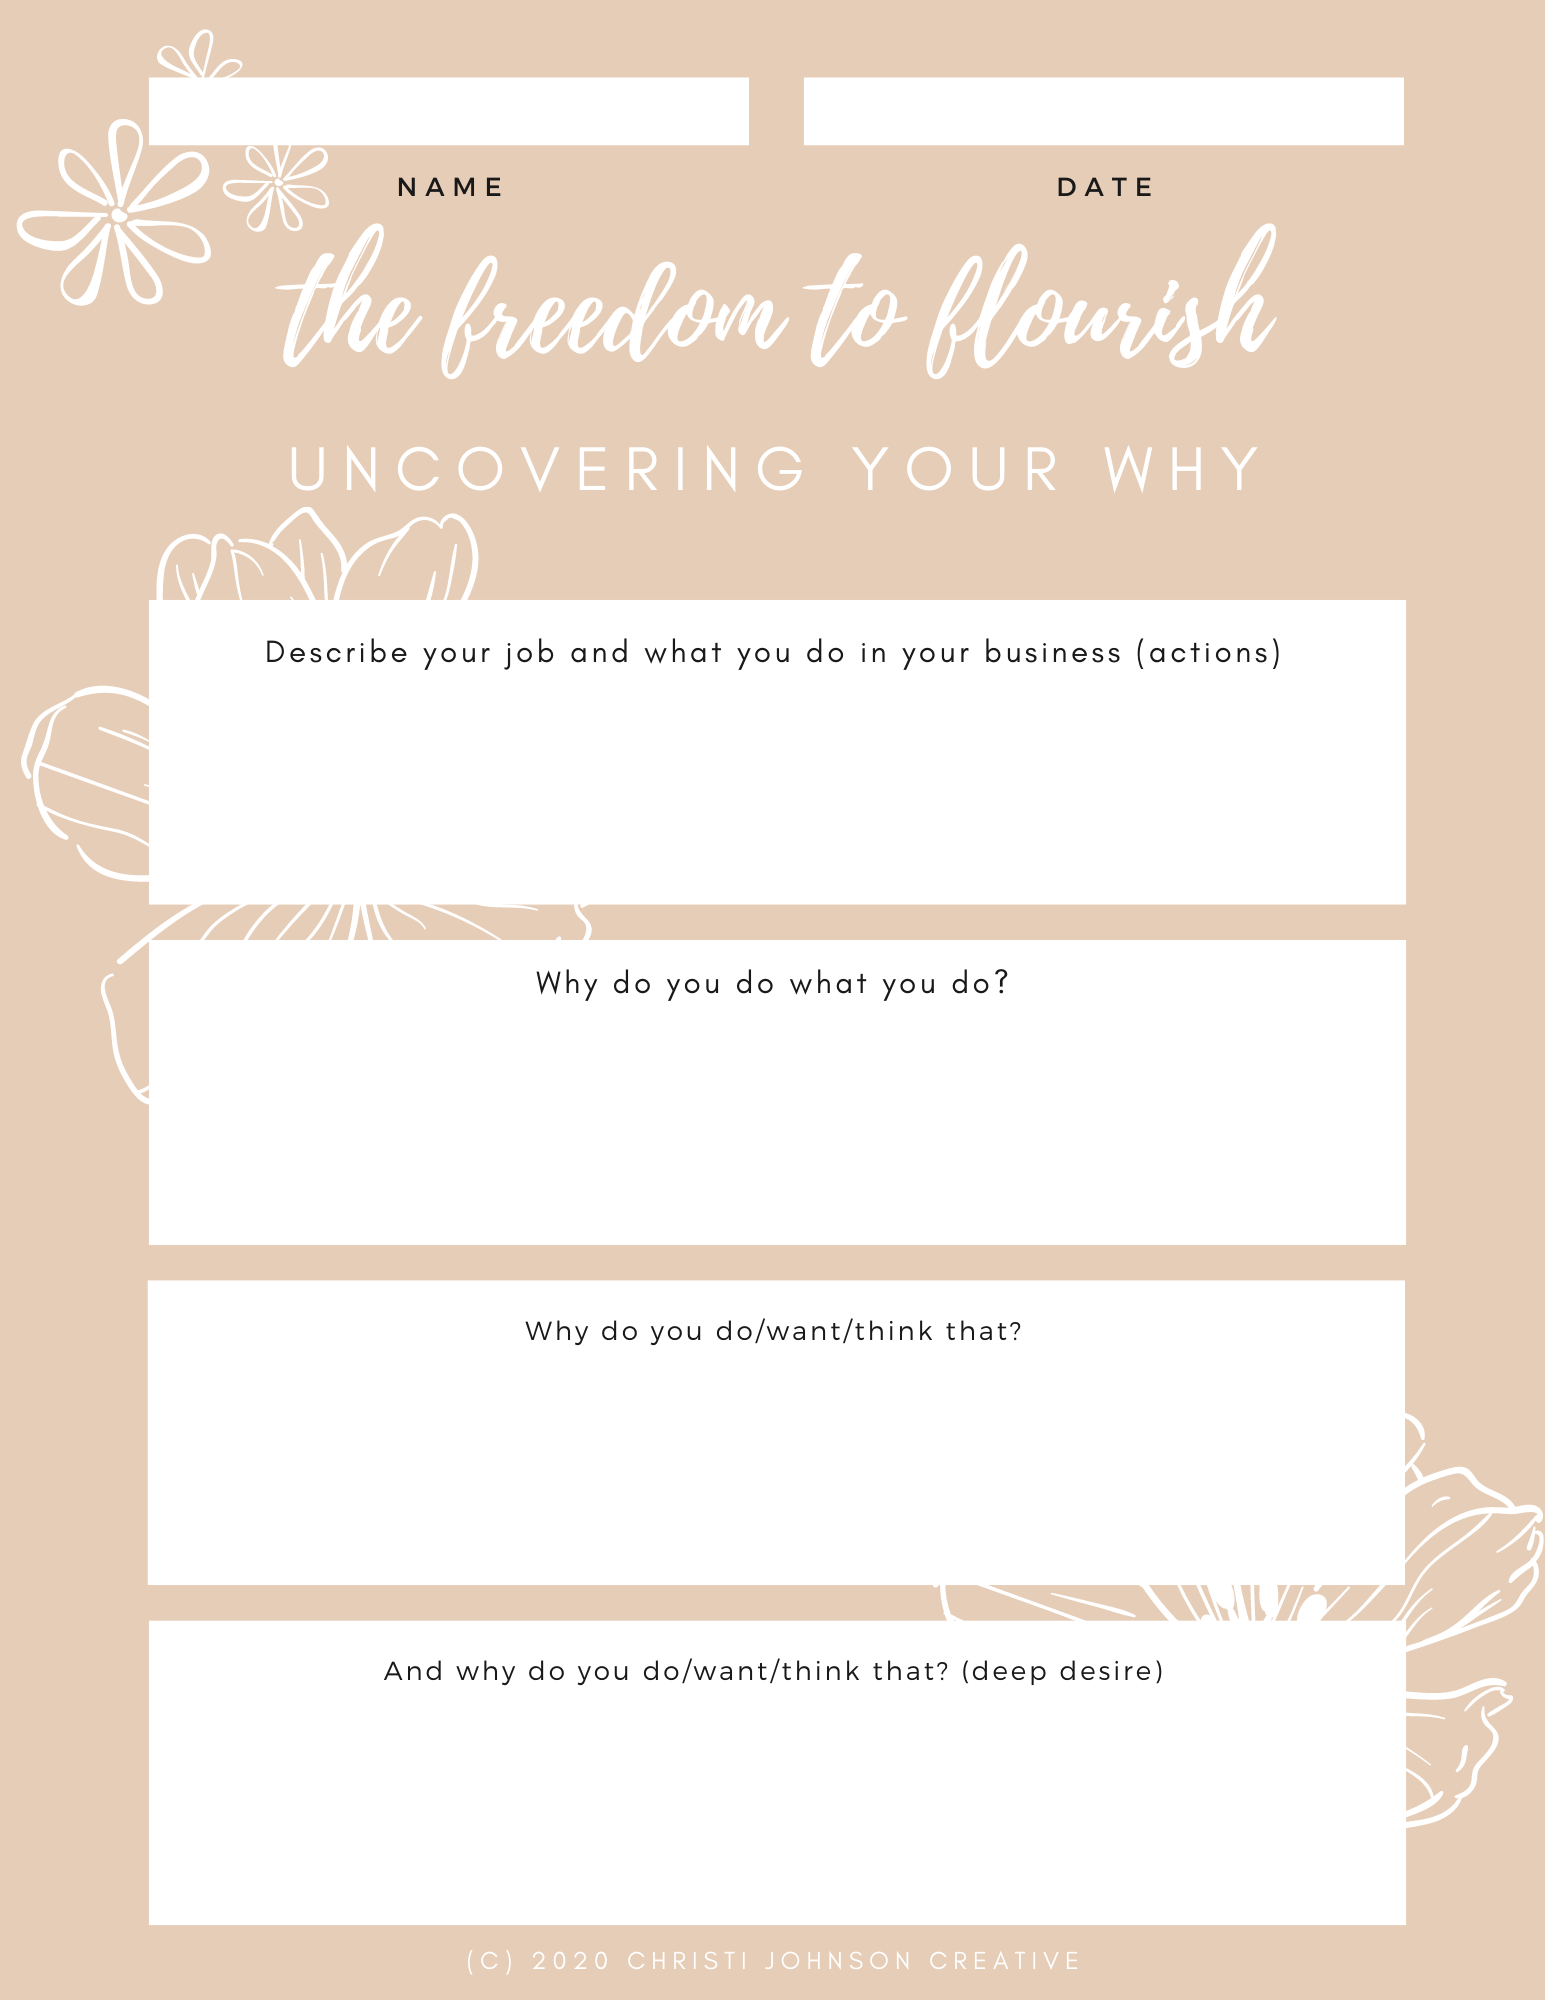 Free Uncovering Your Why Worksheet | Christi Johnson Creative